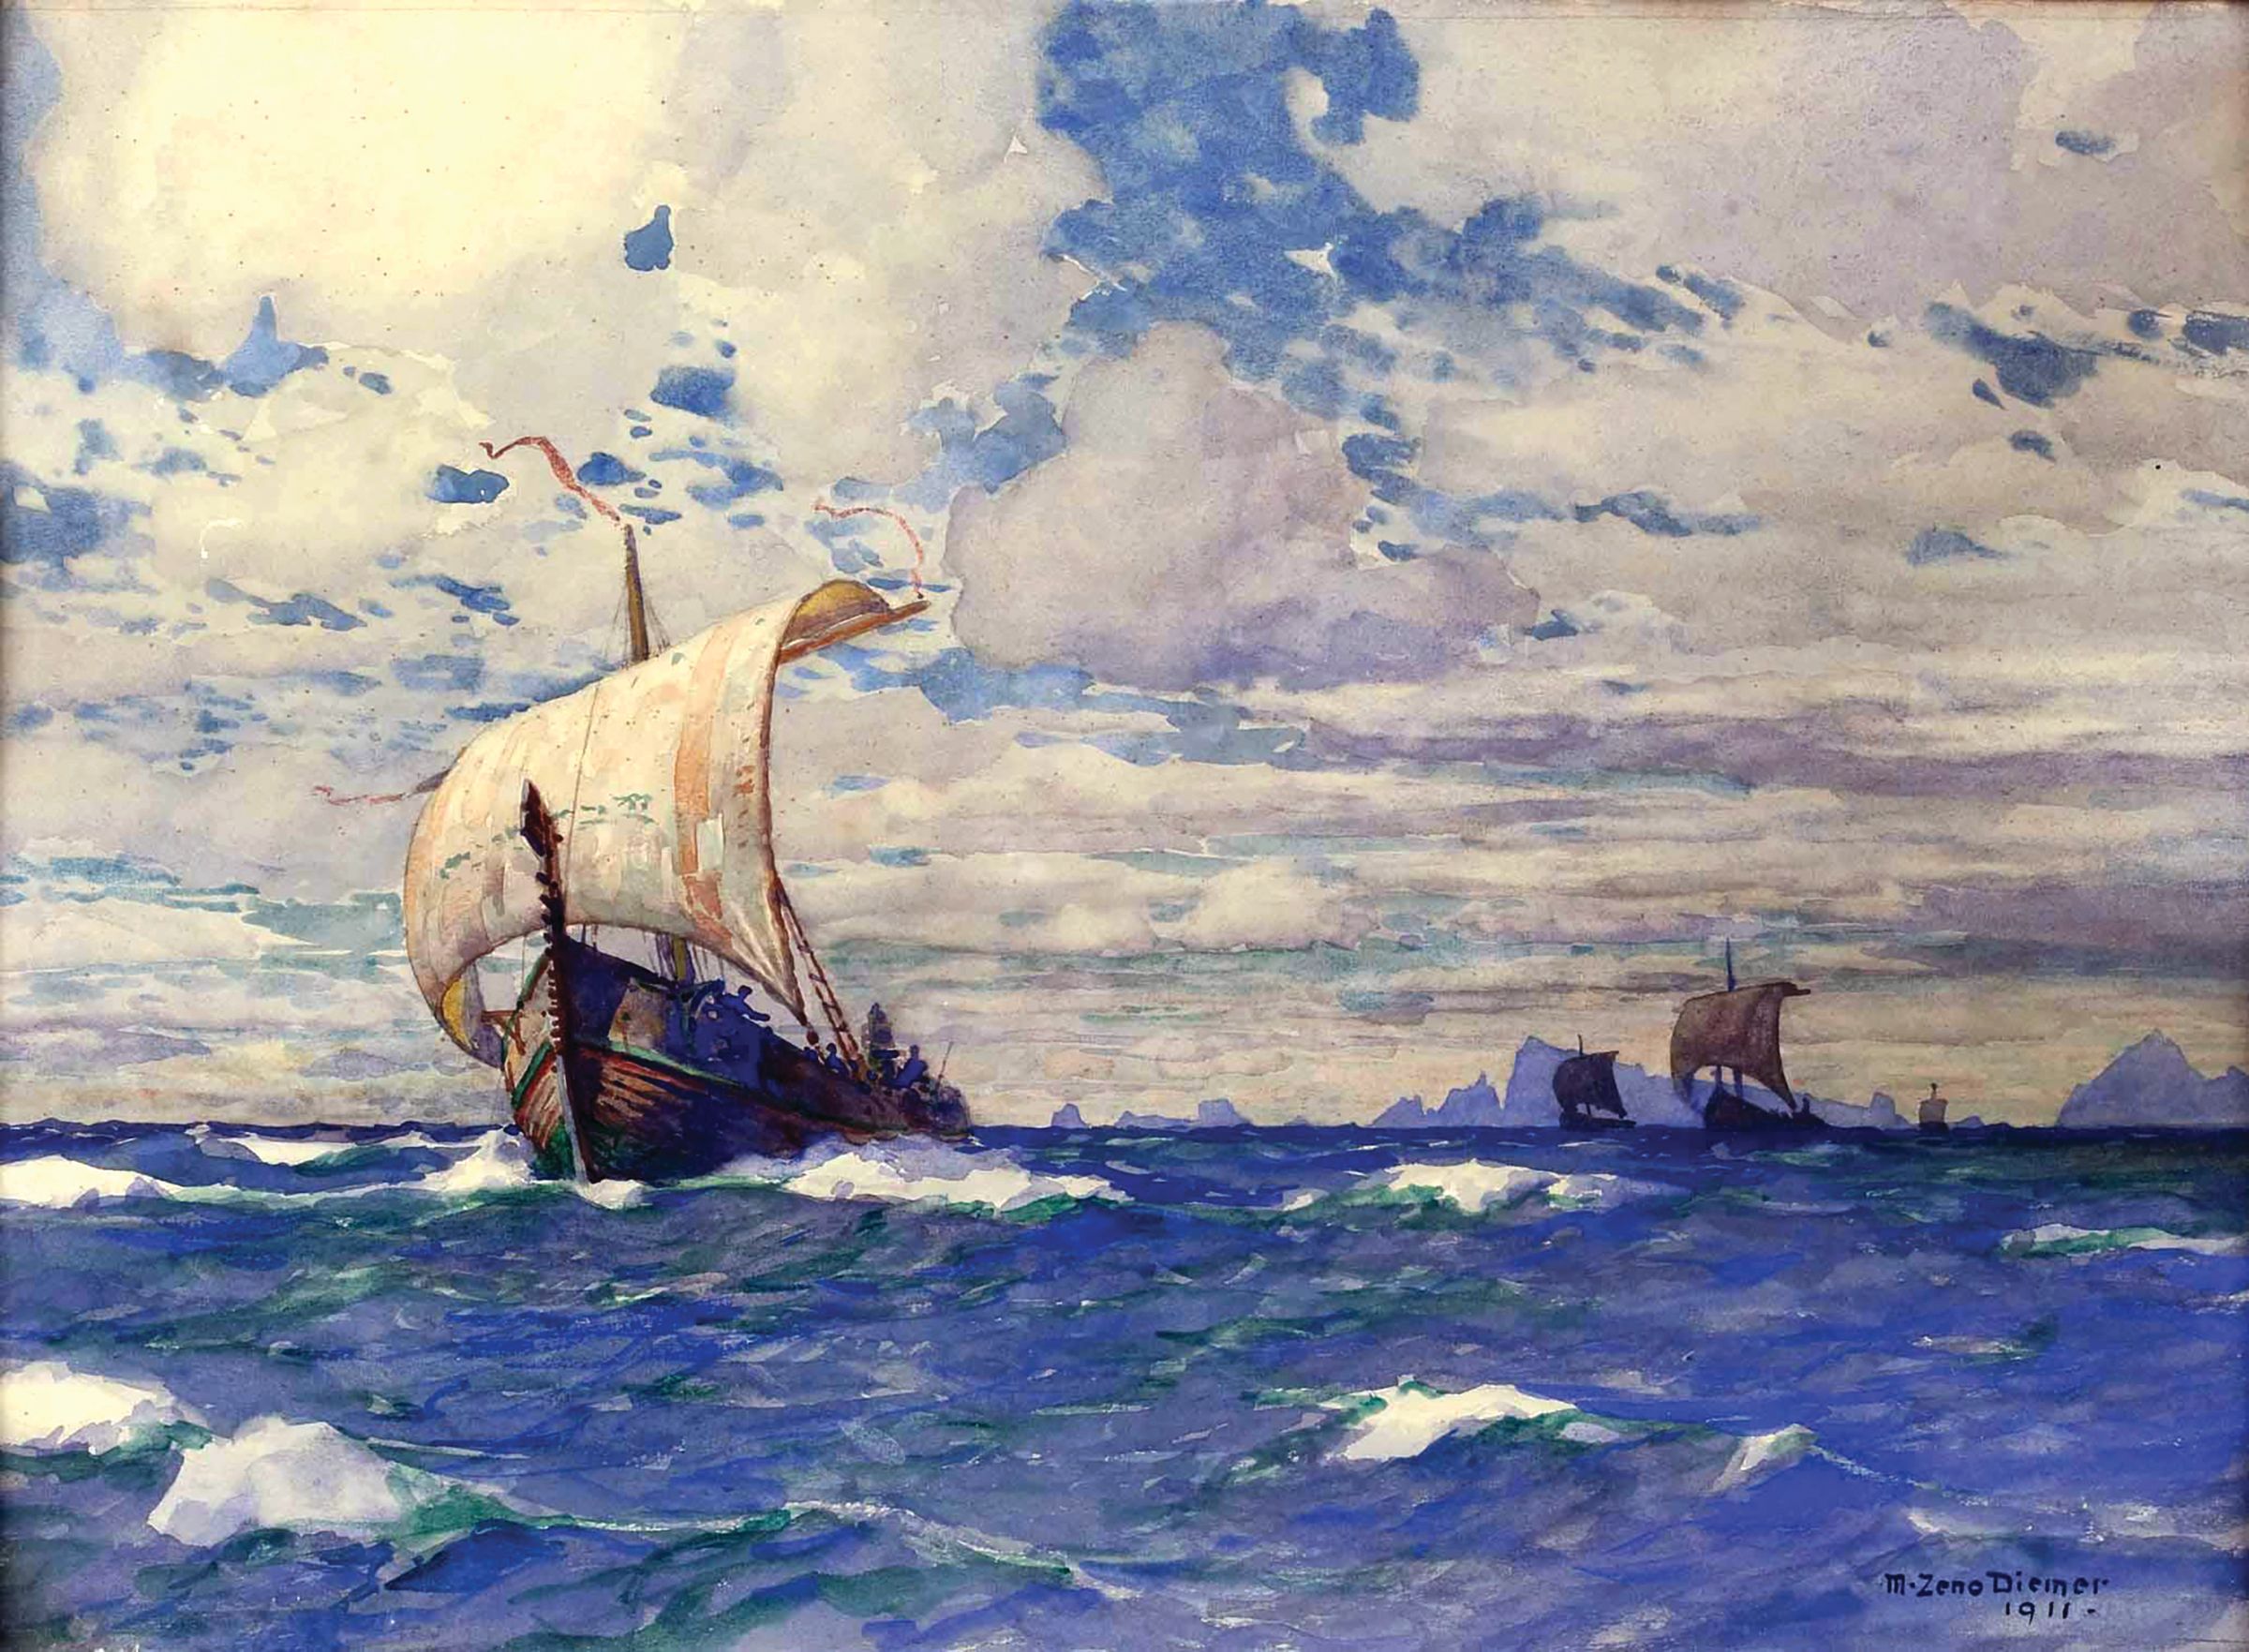 “Viking Ships Off the Rocky Coast,” by German artist M. Zeno Diemer (1867–1939). Raiders from what is now Denmark, frequently raided the English Isles in Viking longships. Powered by sail and oars, the shallow-draft vessels could be portaged overland into seas, lakes and rivers to raid far inland.